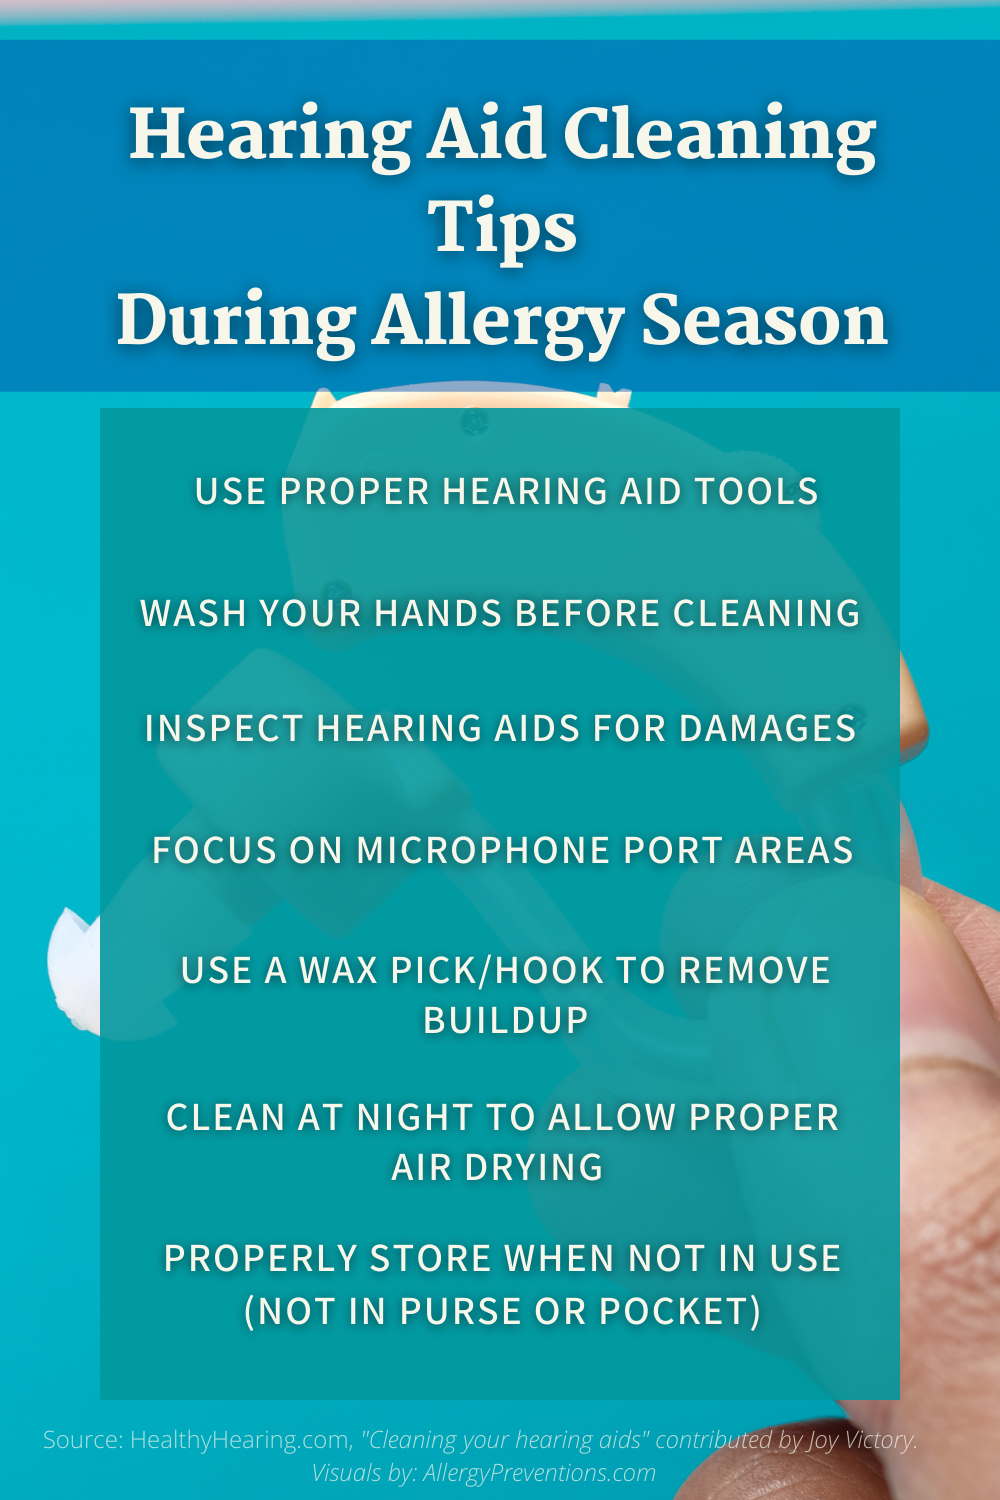 Hearing aid cleaning tips during allergy season infographic: use proper hearing aid tools, wash your hands before cleaning, inspect hearing aids for damages, focus on microphone port areas, use a wax pick/hook to remove buildup, clean at night to allow proper air drying, properly store when not in use (not in purse or pocket)